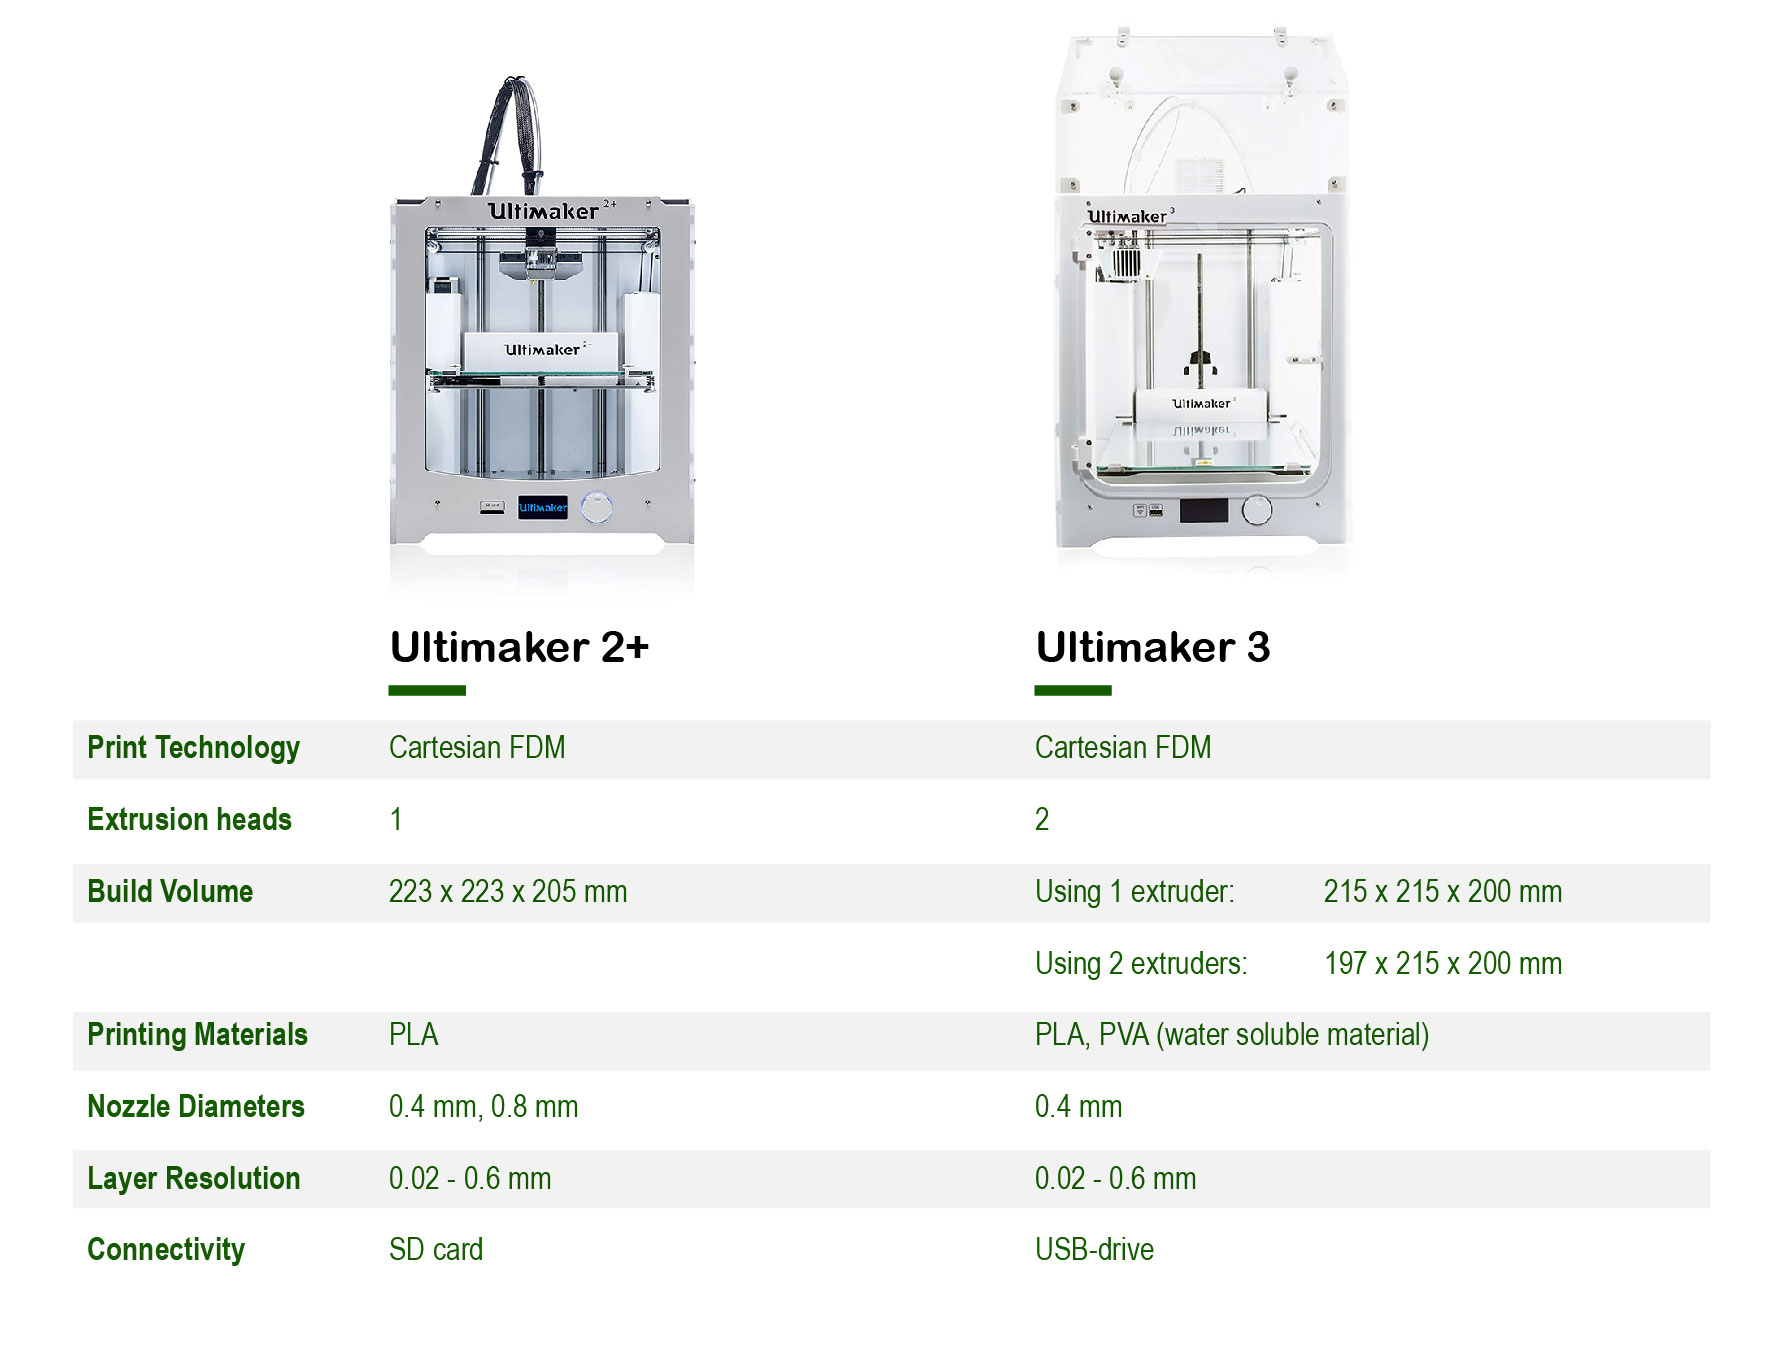 Comparison chart between Ultimaker 2 Plus and Ultimaker 3